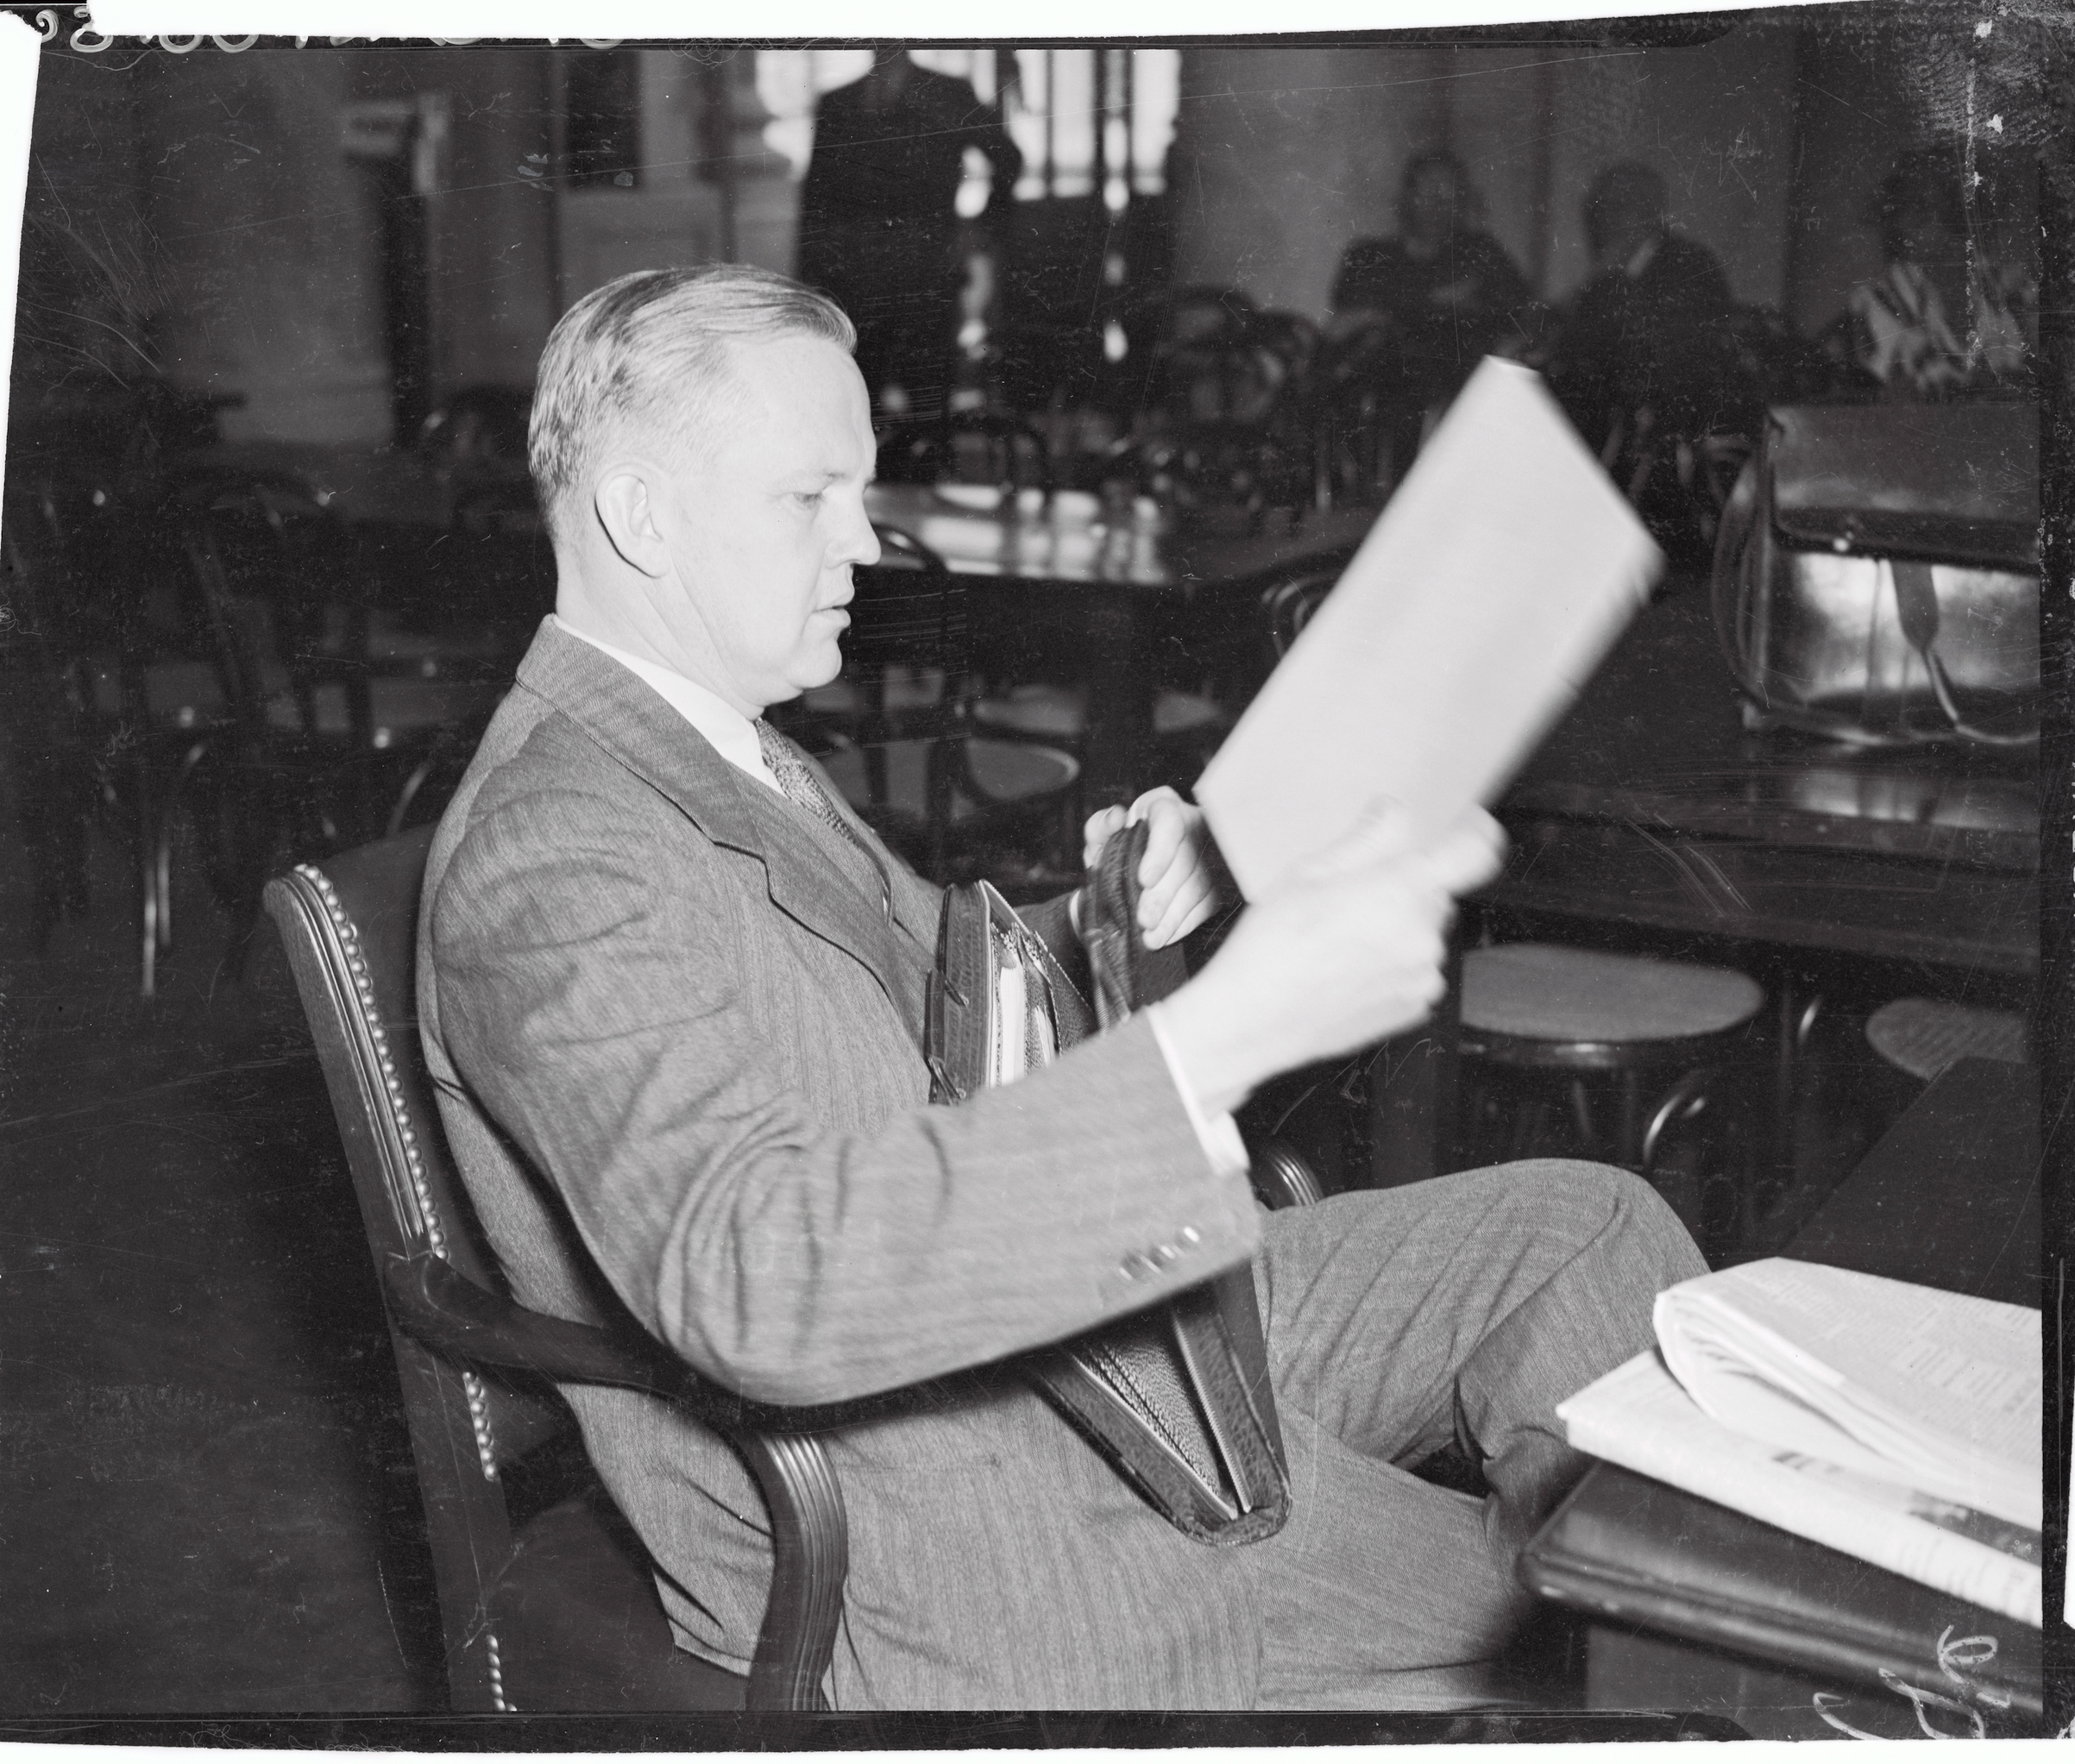 William Alfred Eddy, then president of Hobart and William Smith Colleges, at Geneva, N.Y., as he testified before the Senate Judiciary Committee in Washington, D.C., in 1937. (Bettmann—Bettmann Archive)